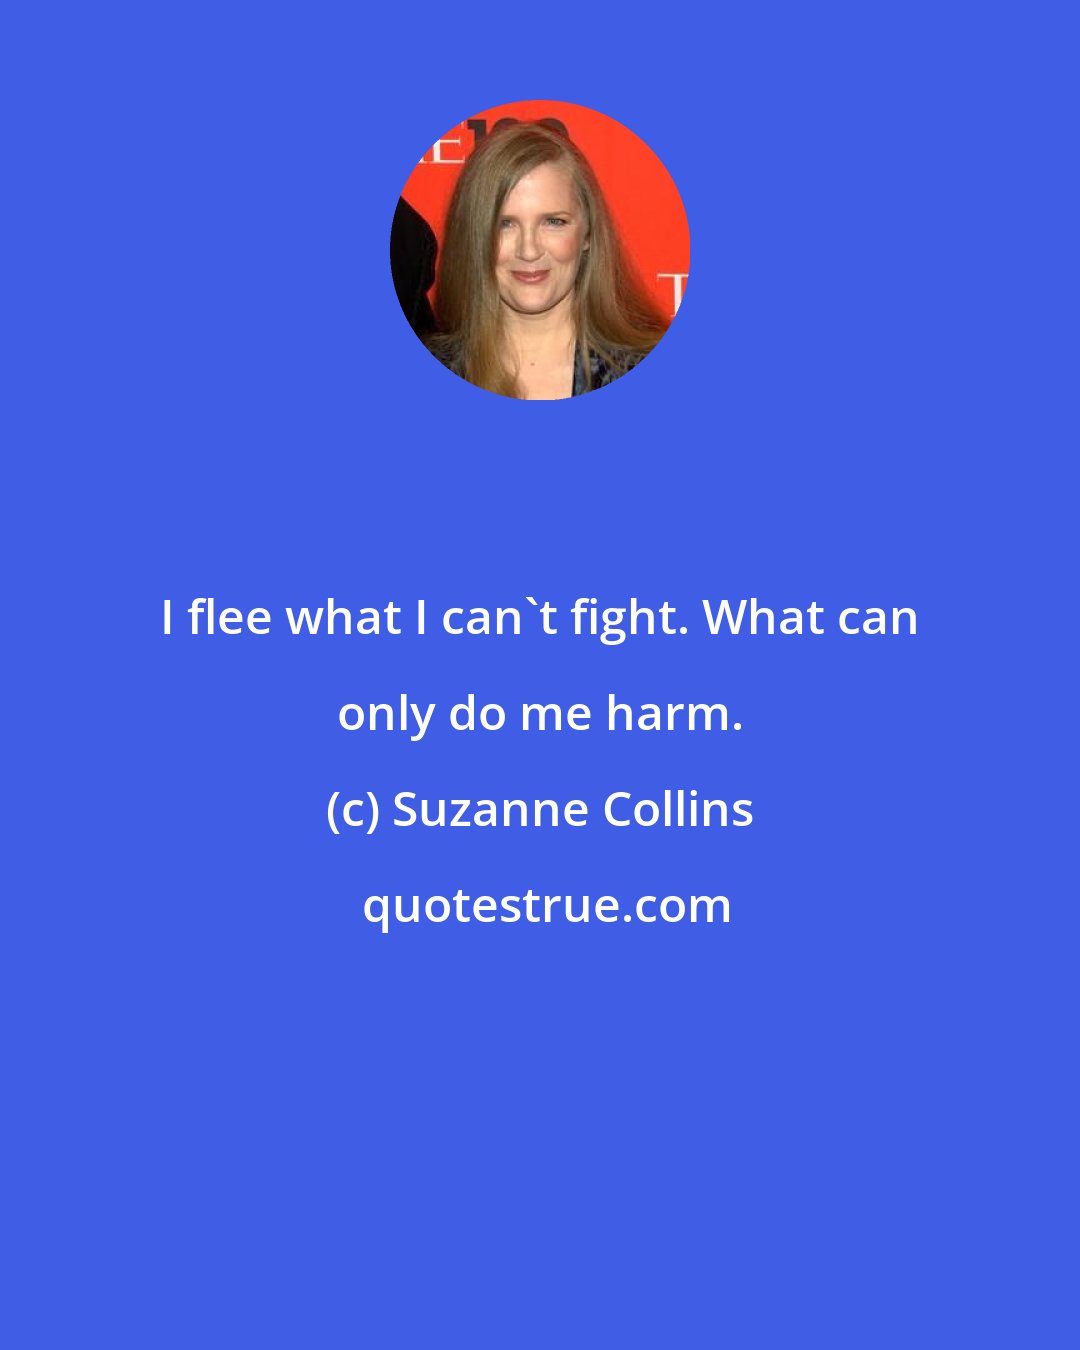 Suzanne Collins: I flee what I can't fight. What can only do me harm.